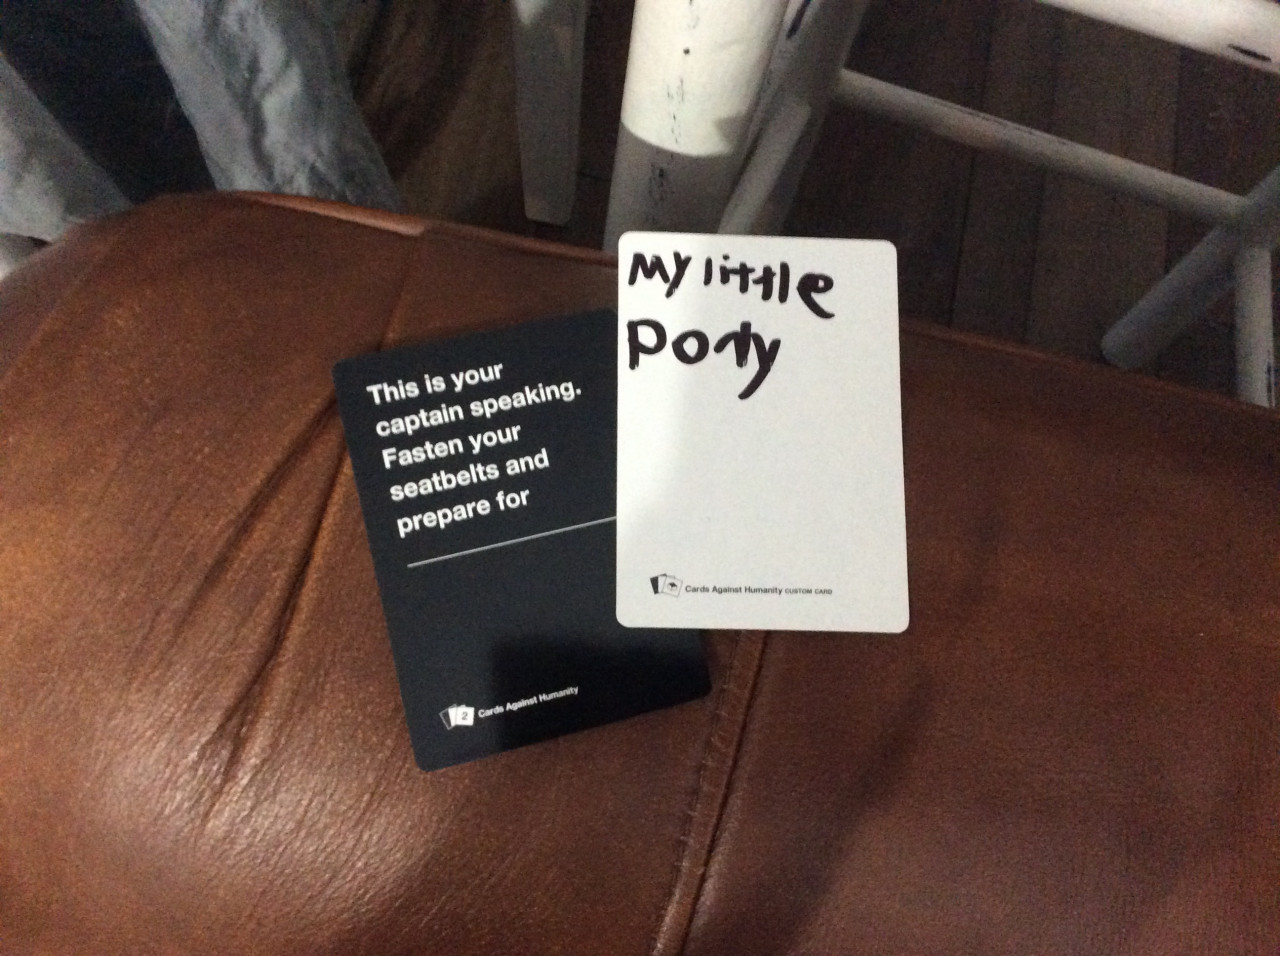 Cards Against Humanity - Download